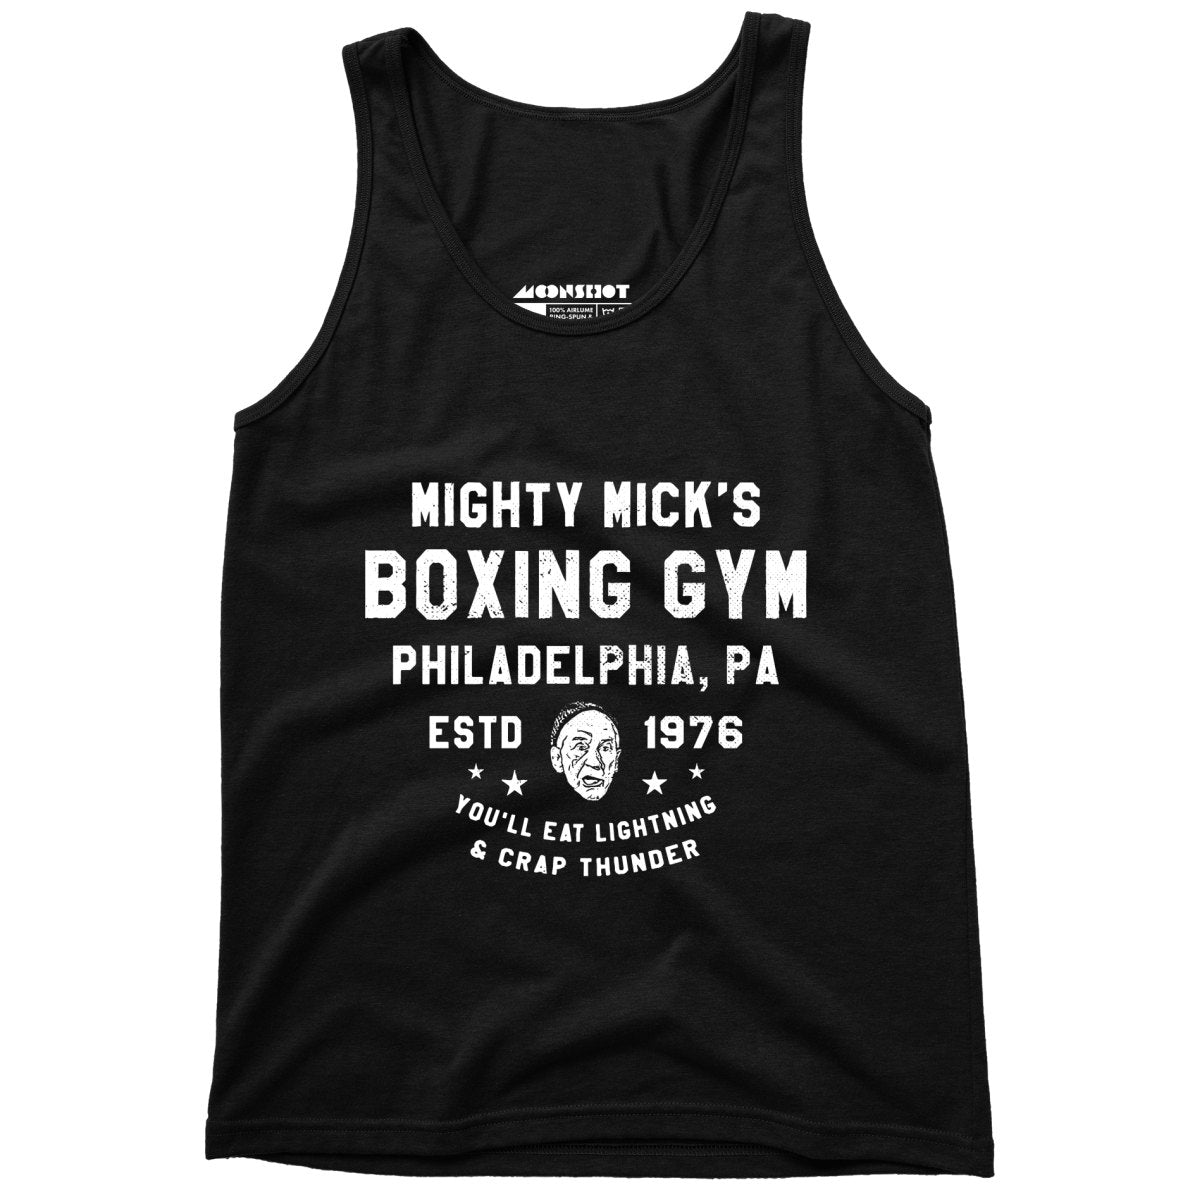 Mighty Mick's Boxing Gym - Unisex Tank Top